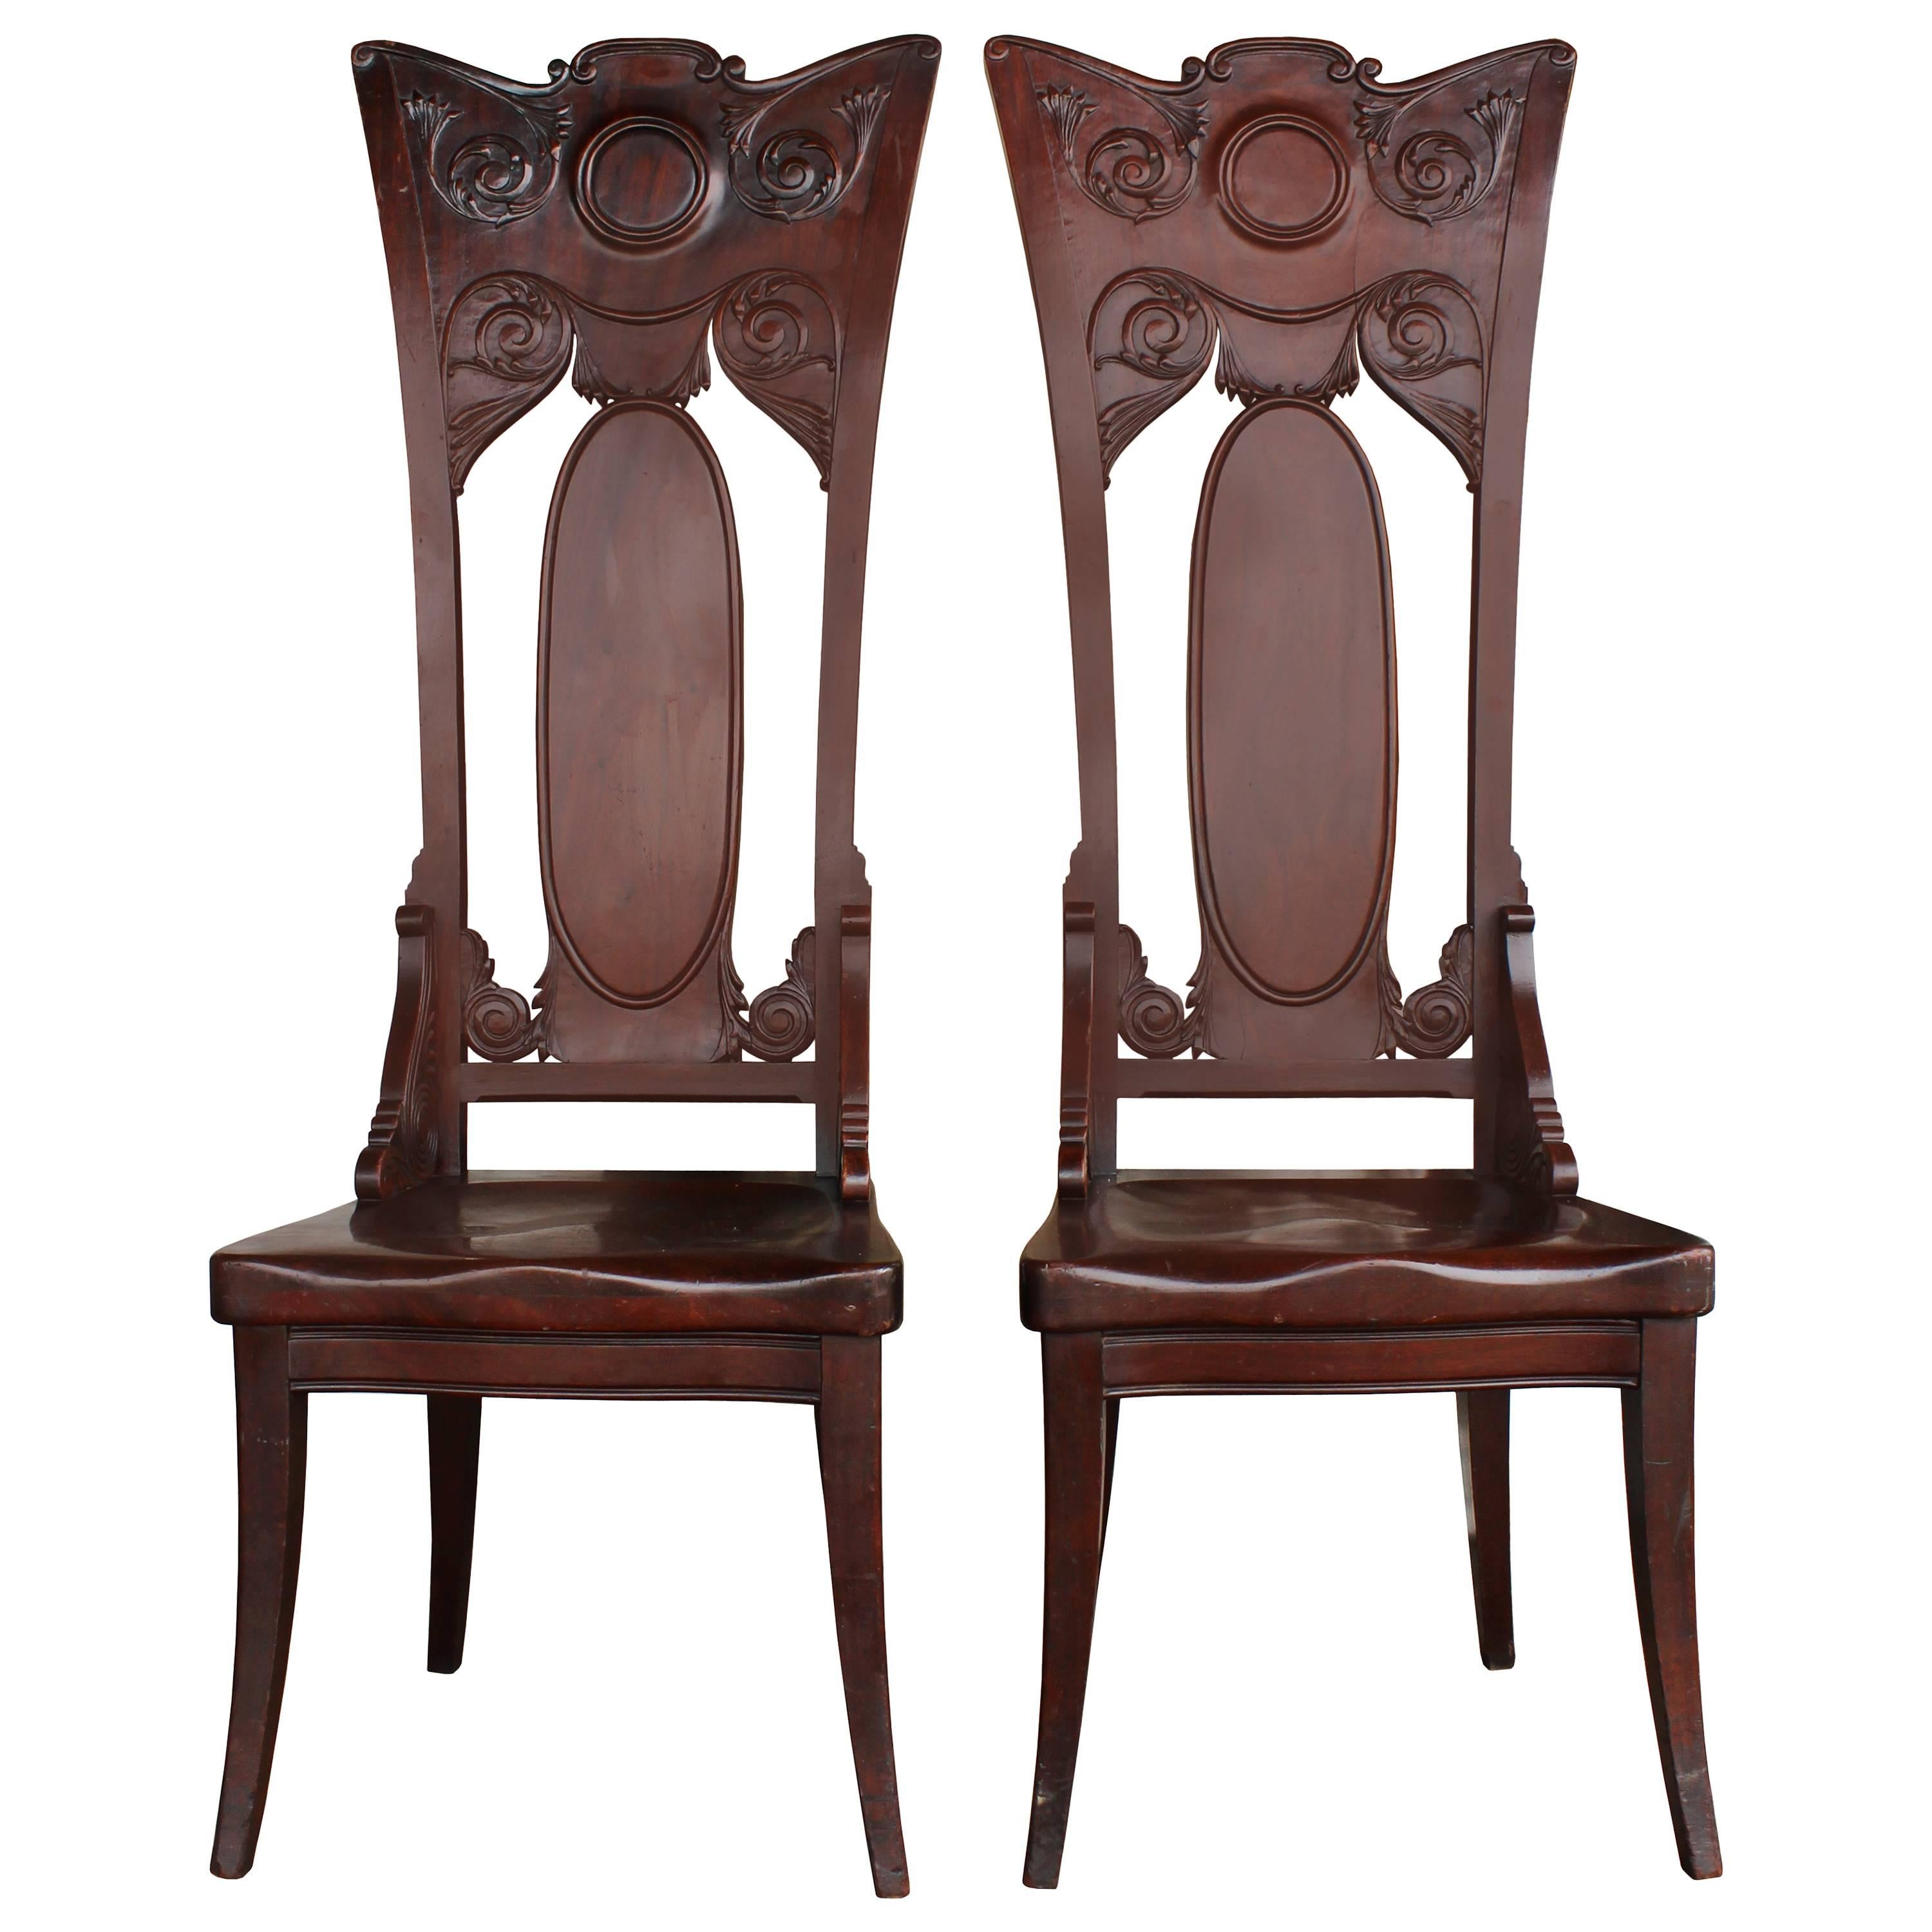 Pair of Early 20th Century Transitional High Back Chairs